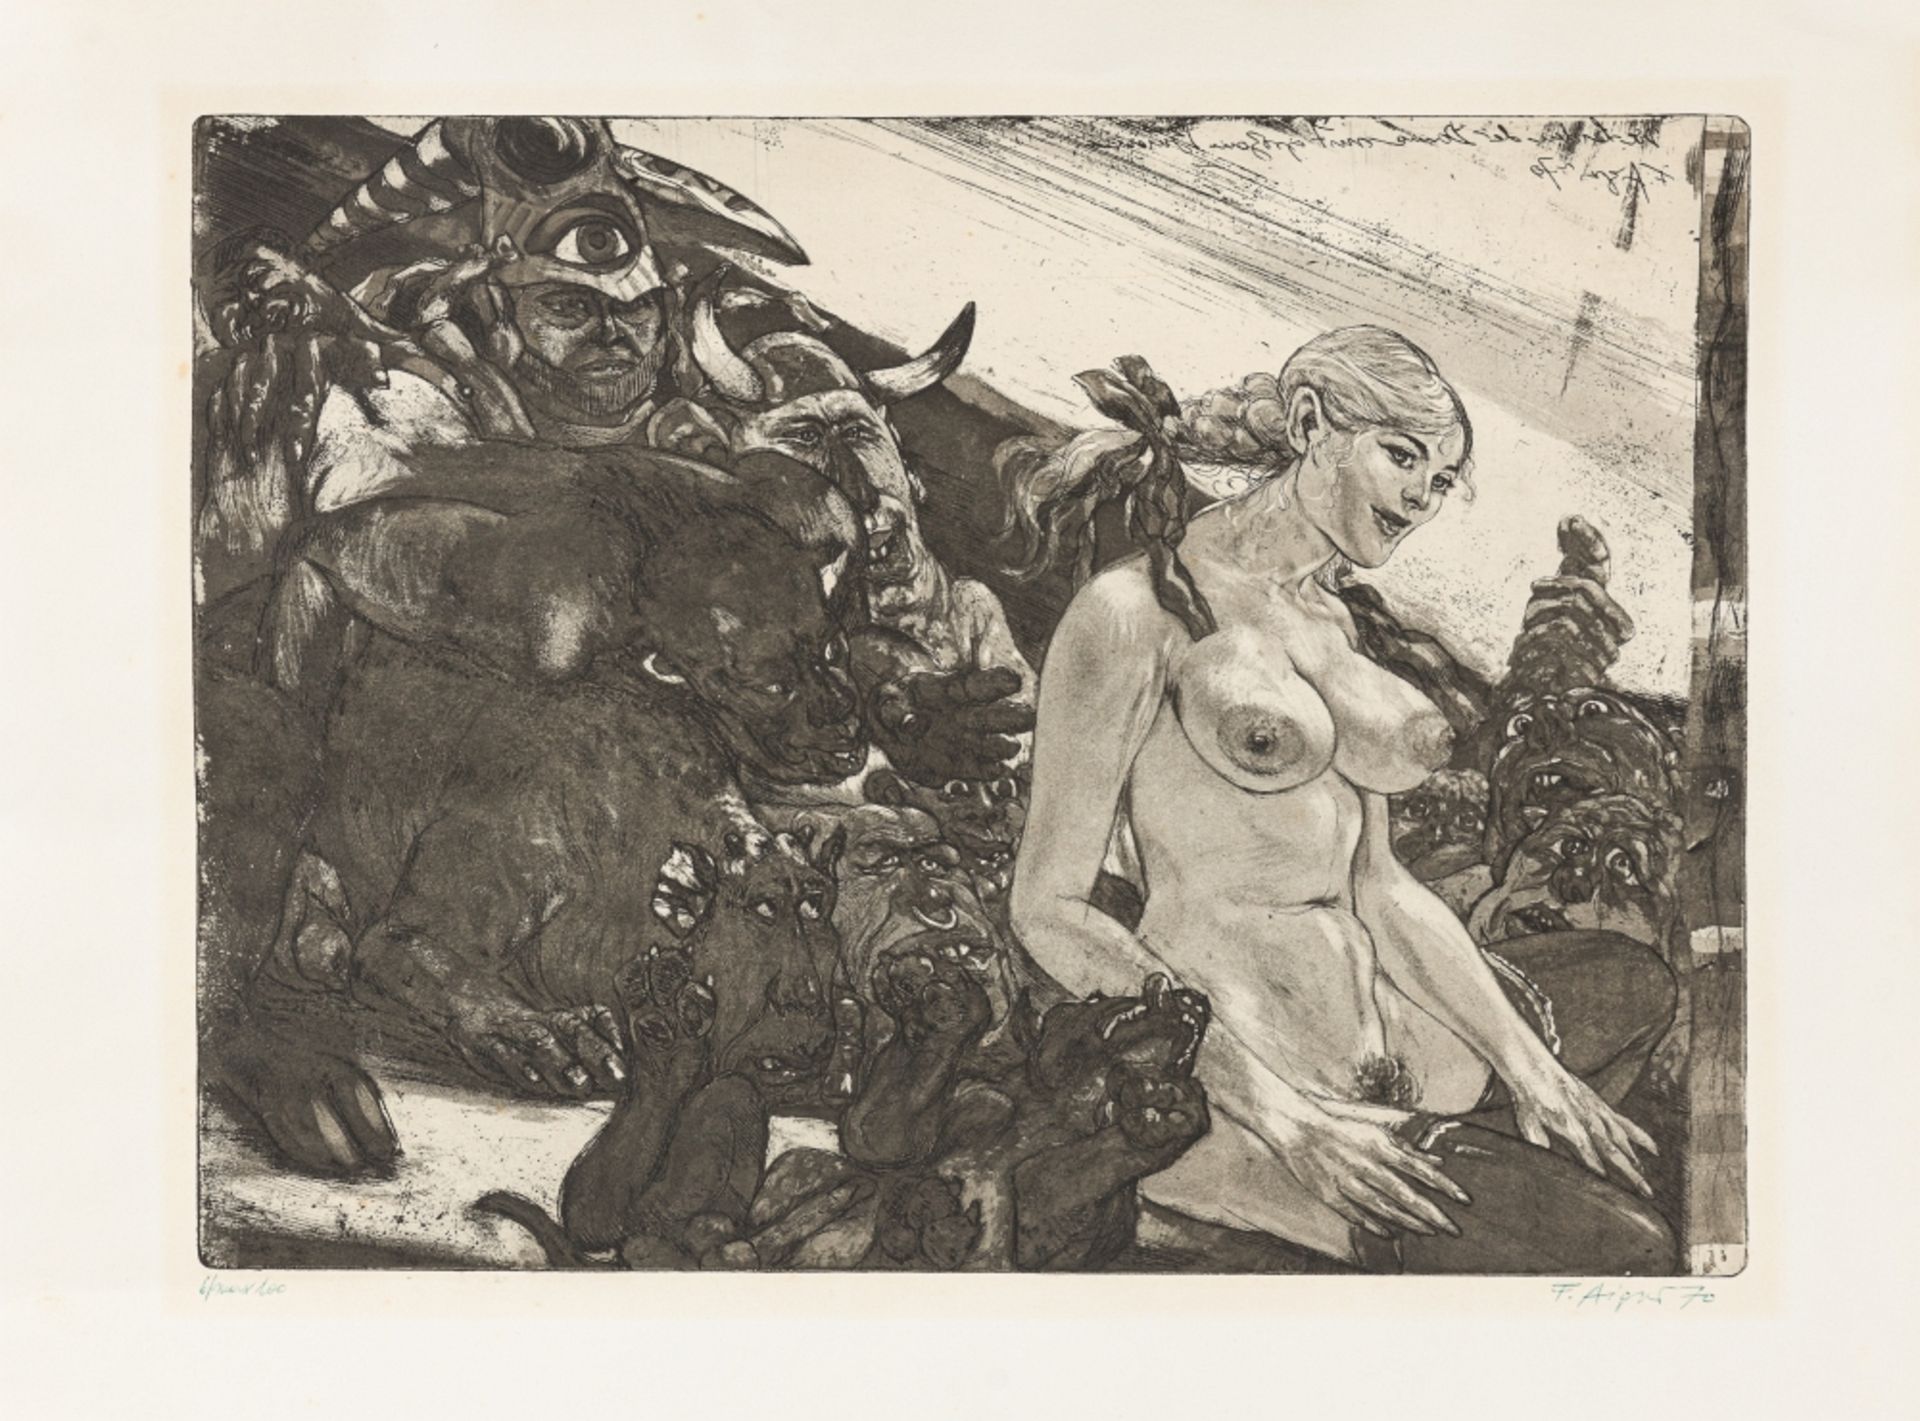 Aigner, Fritz (1930 - 2005) The Sufferings of the Lady with big Breasts, 1970 Aquatint Etching on - Image 2 of 5